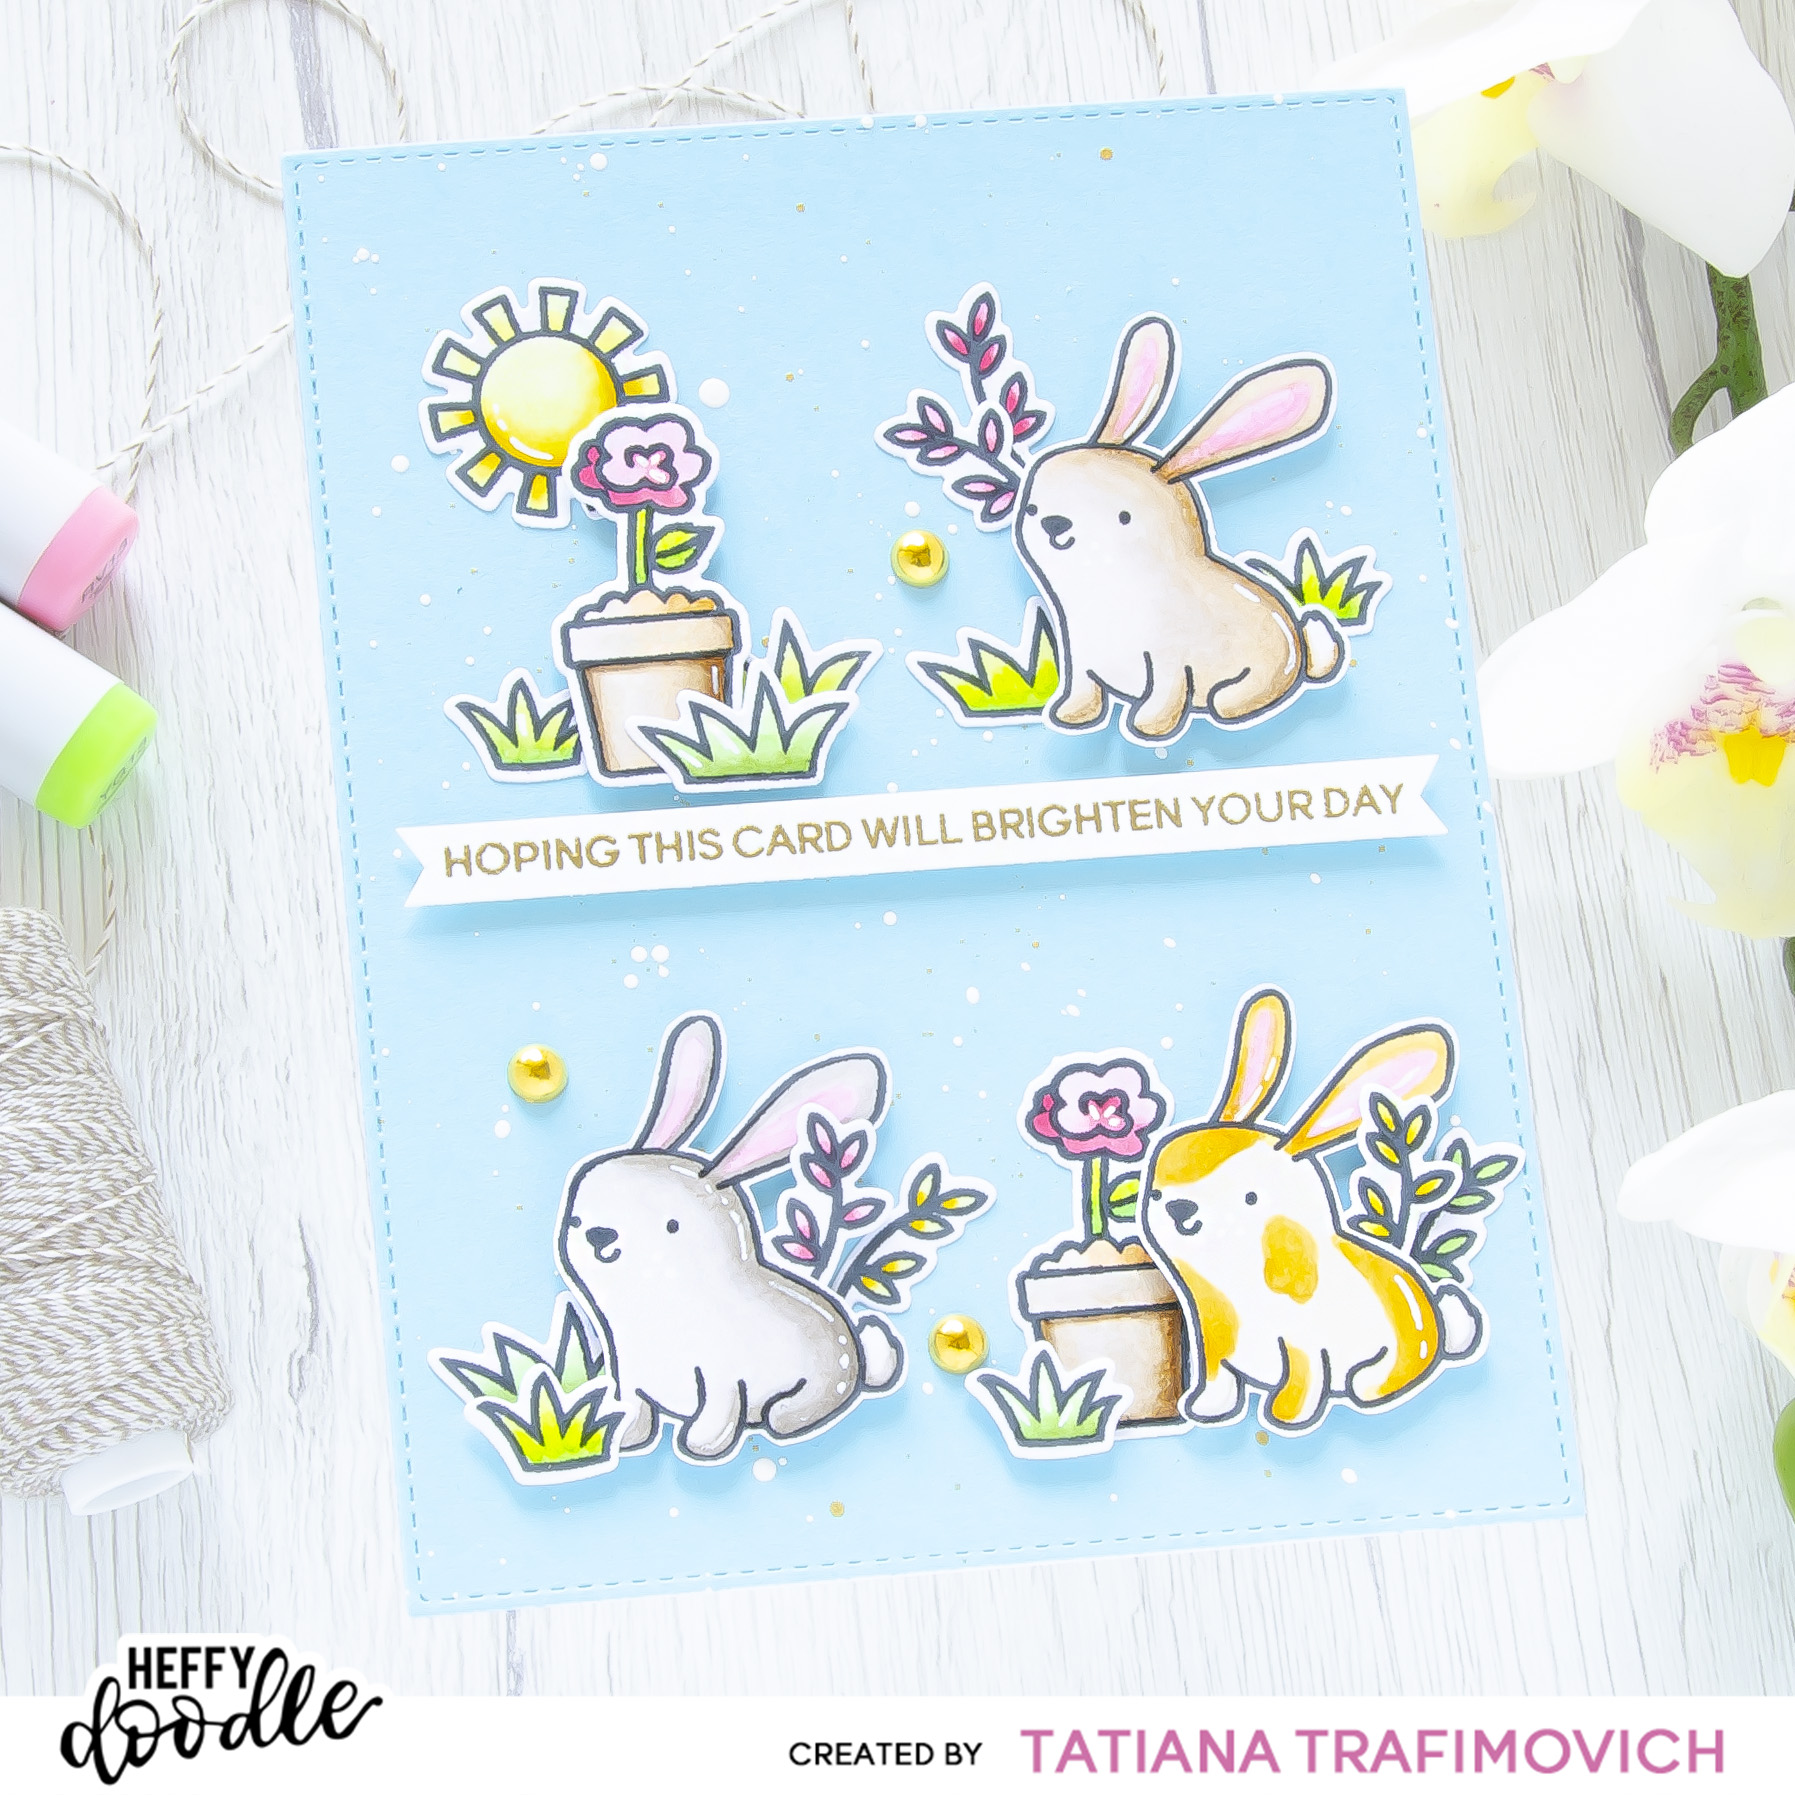 Hope This Card Will Brighten Your Day #handmade card by Tatiana Trafimovich #tatianacraftandart - stamps and dies by Heffy Doodle #heffydoodle